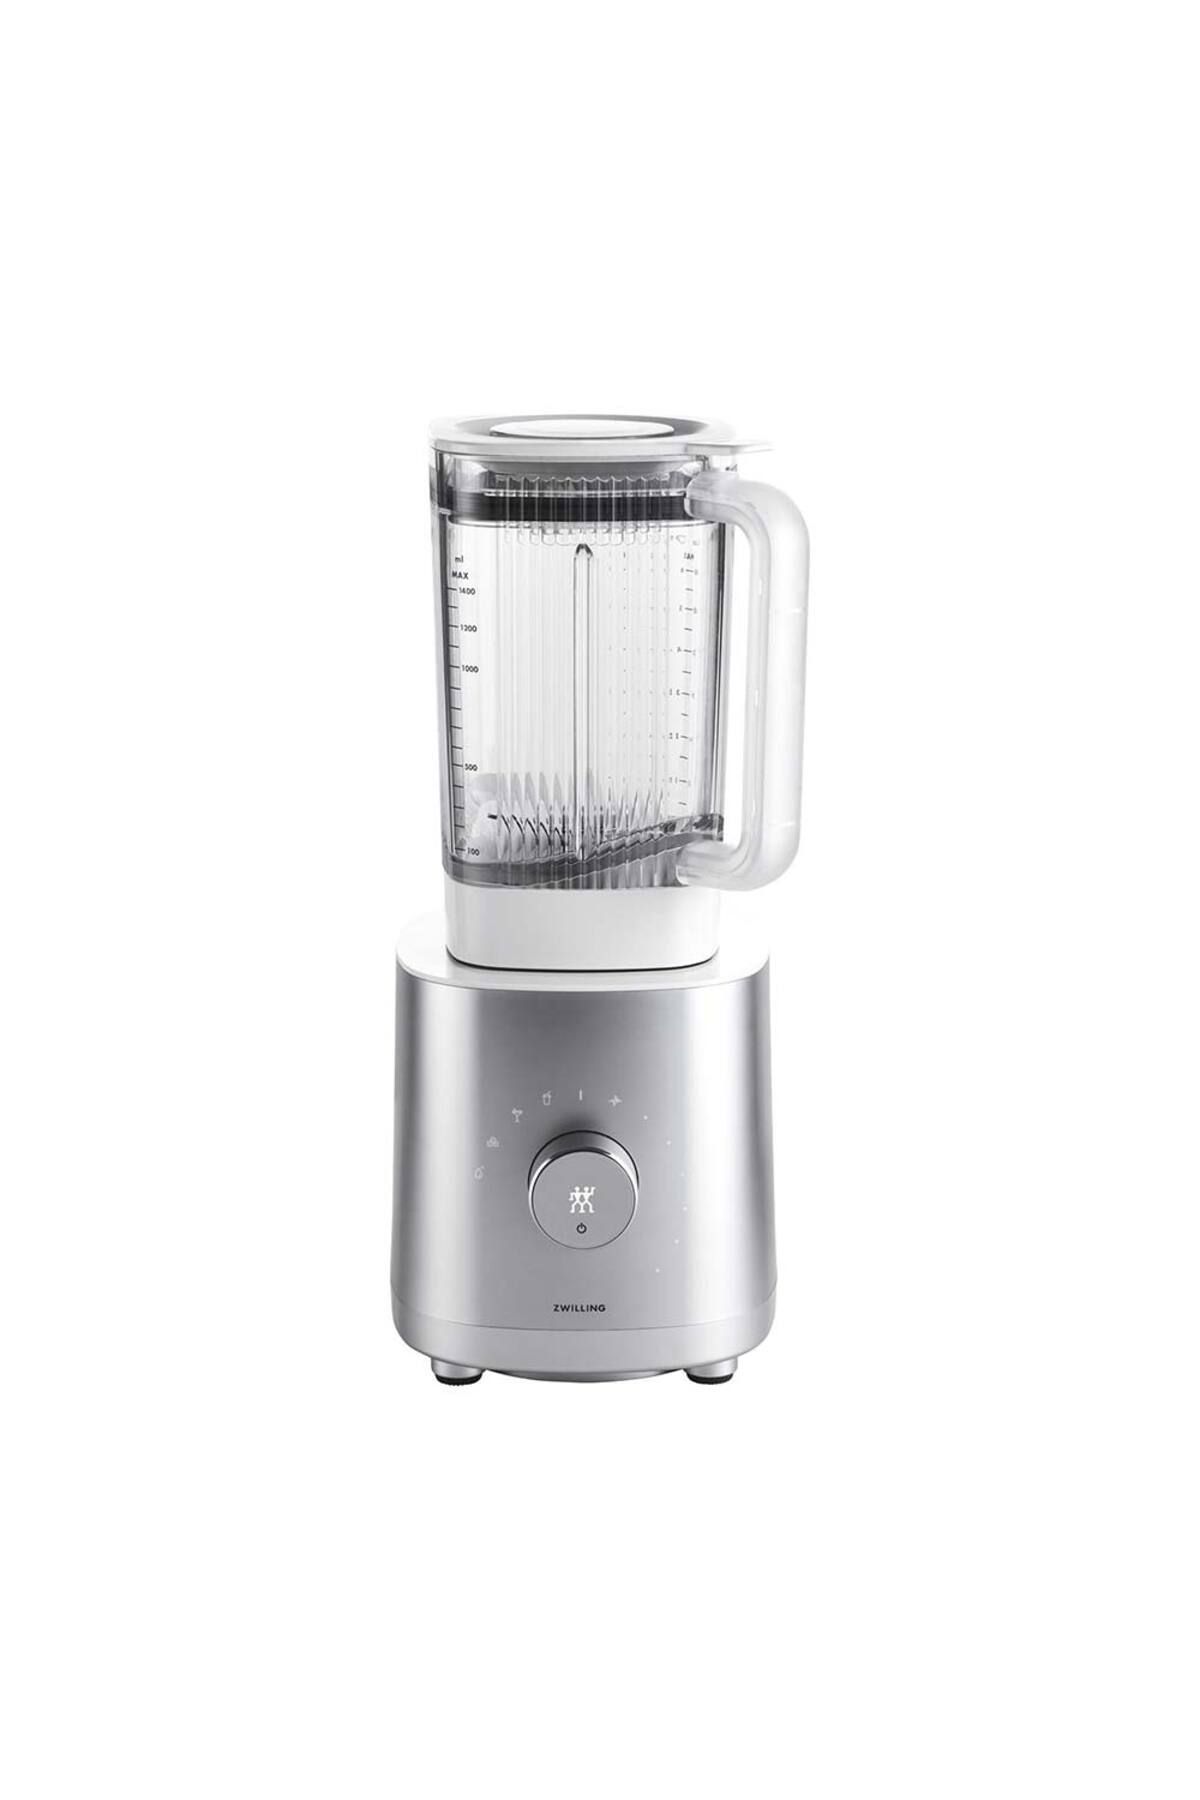 Zwilling 530020000 Table Blender 1200w 1.4l